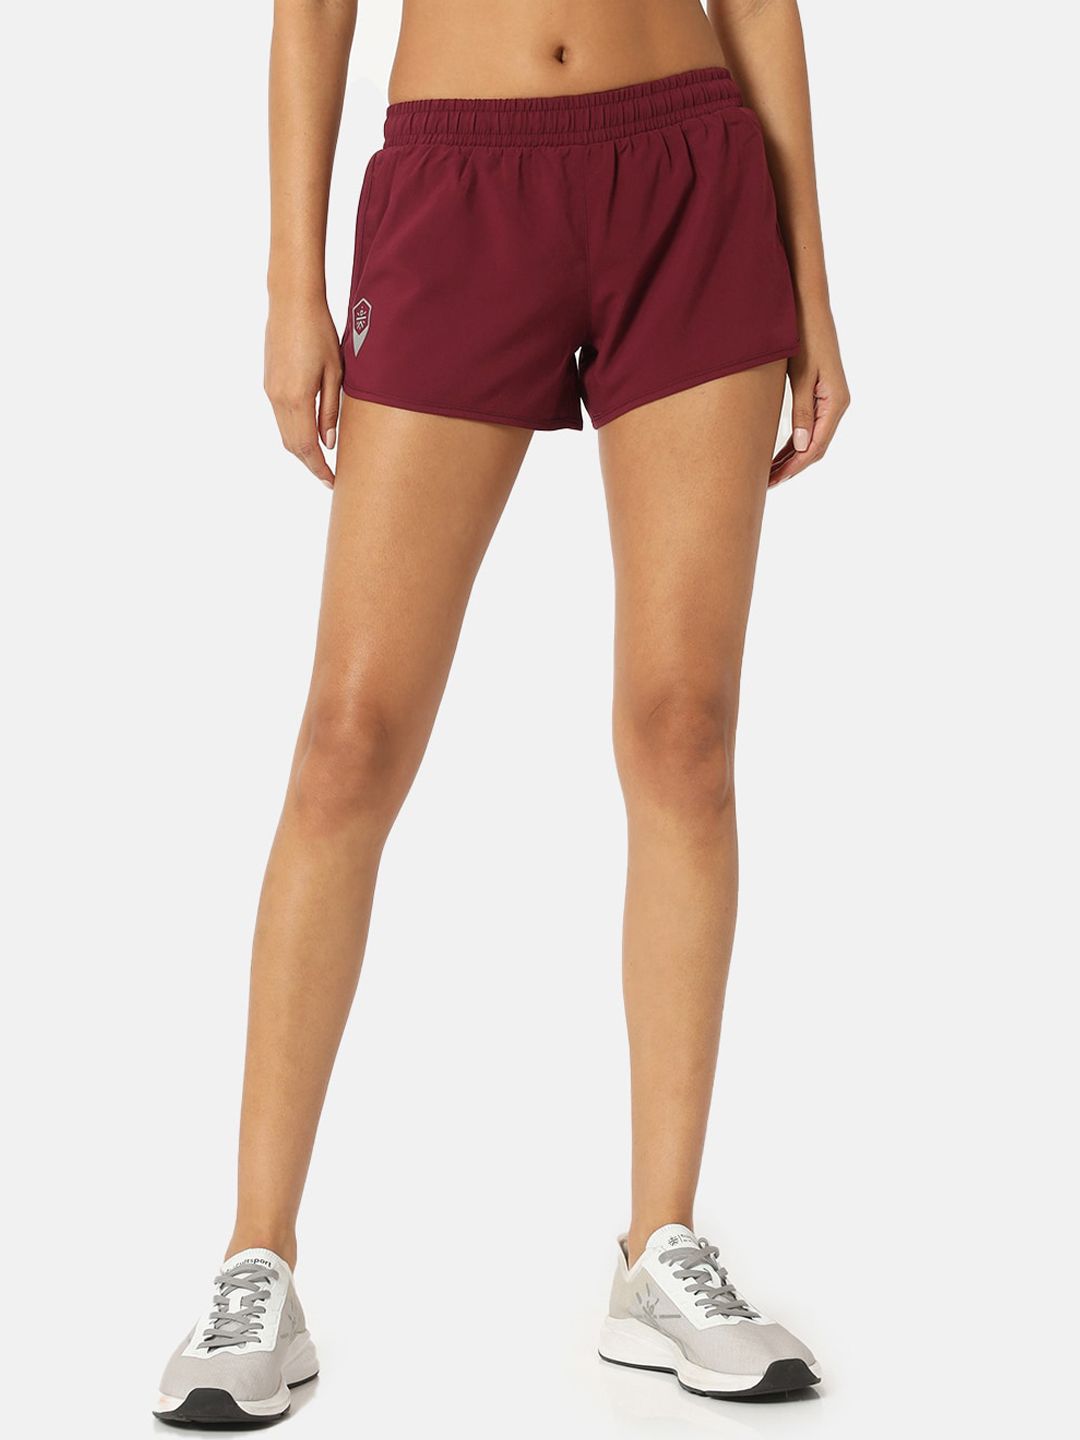 Cultsport Women Maroon Mid-Rise Training or Gym Sports Shorts Price in India